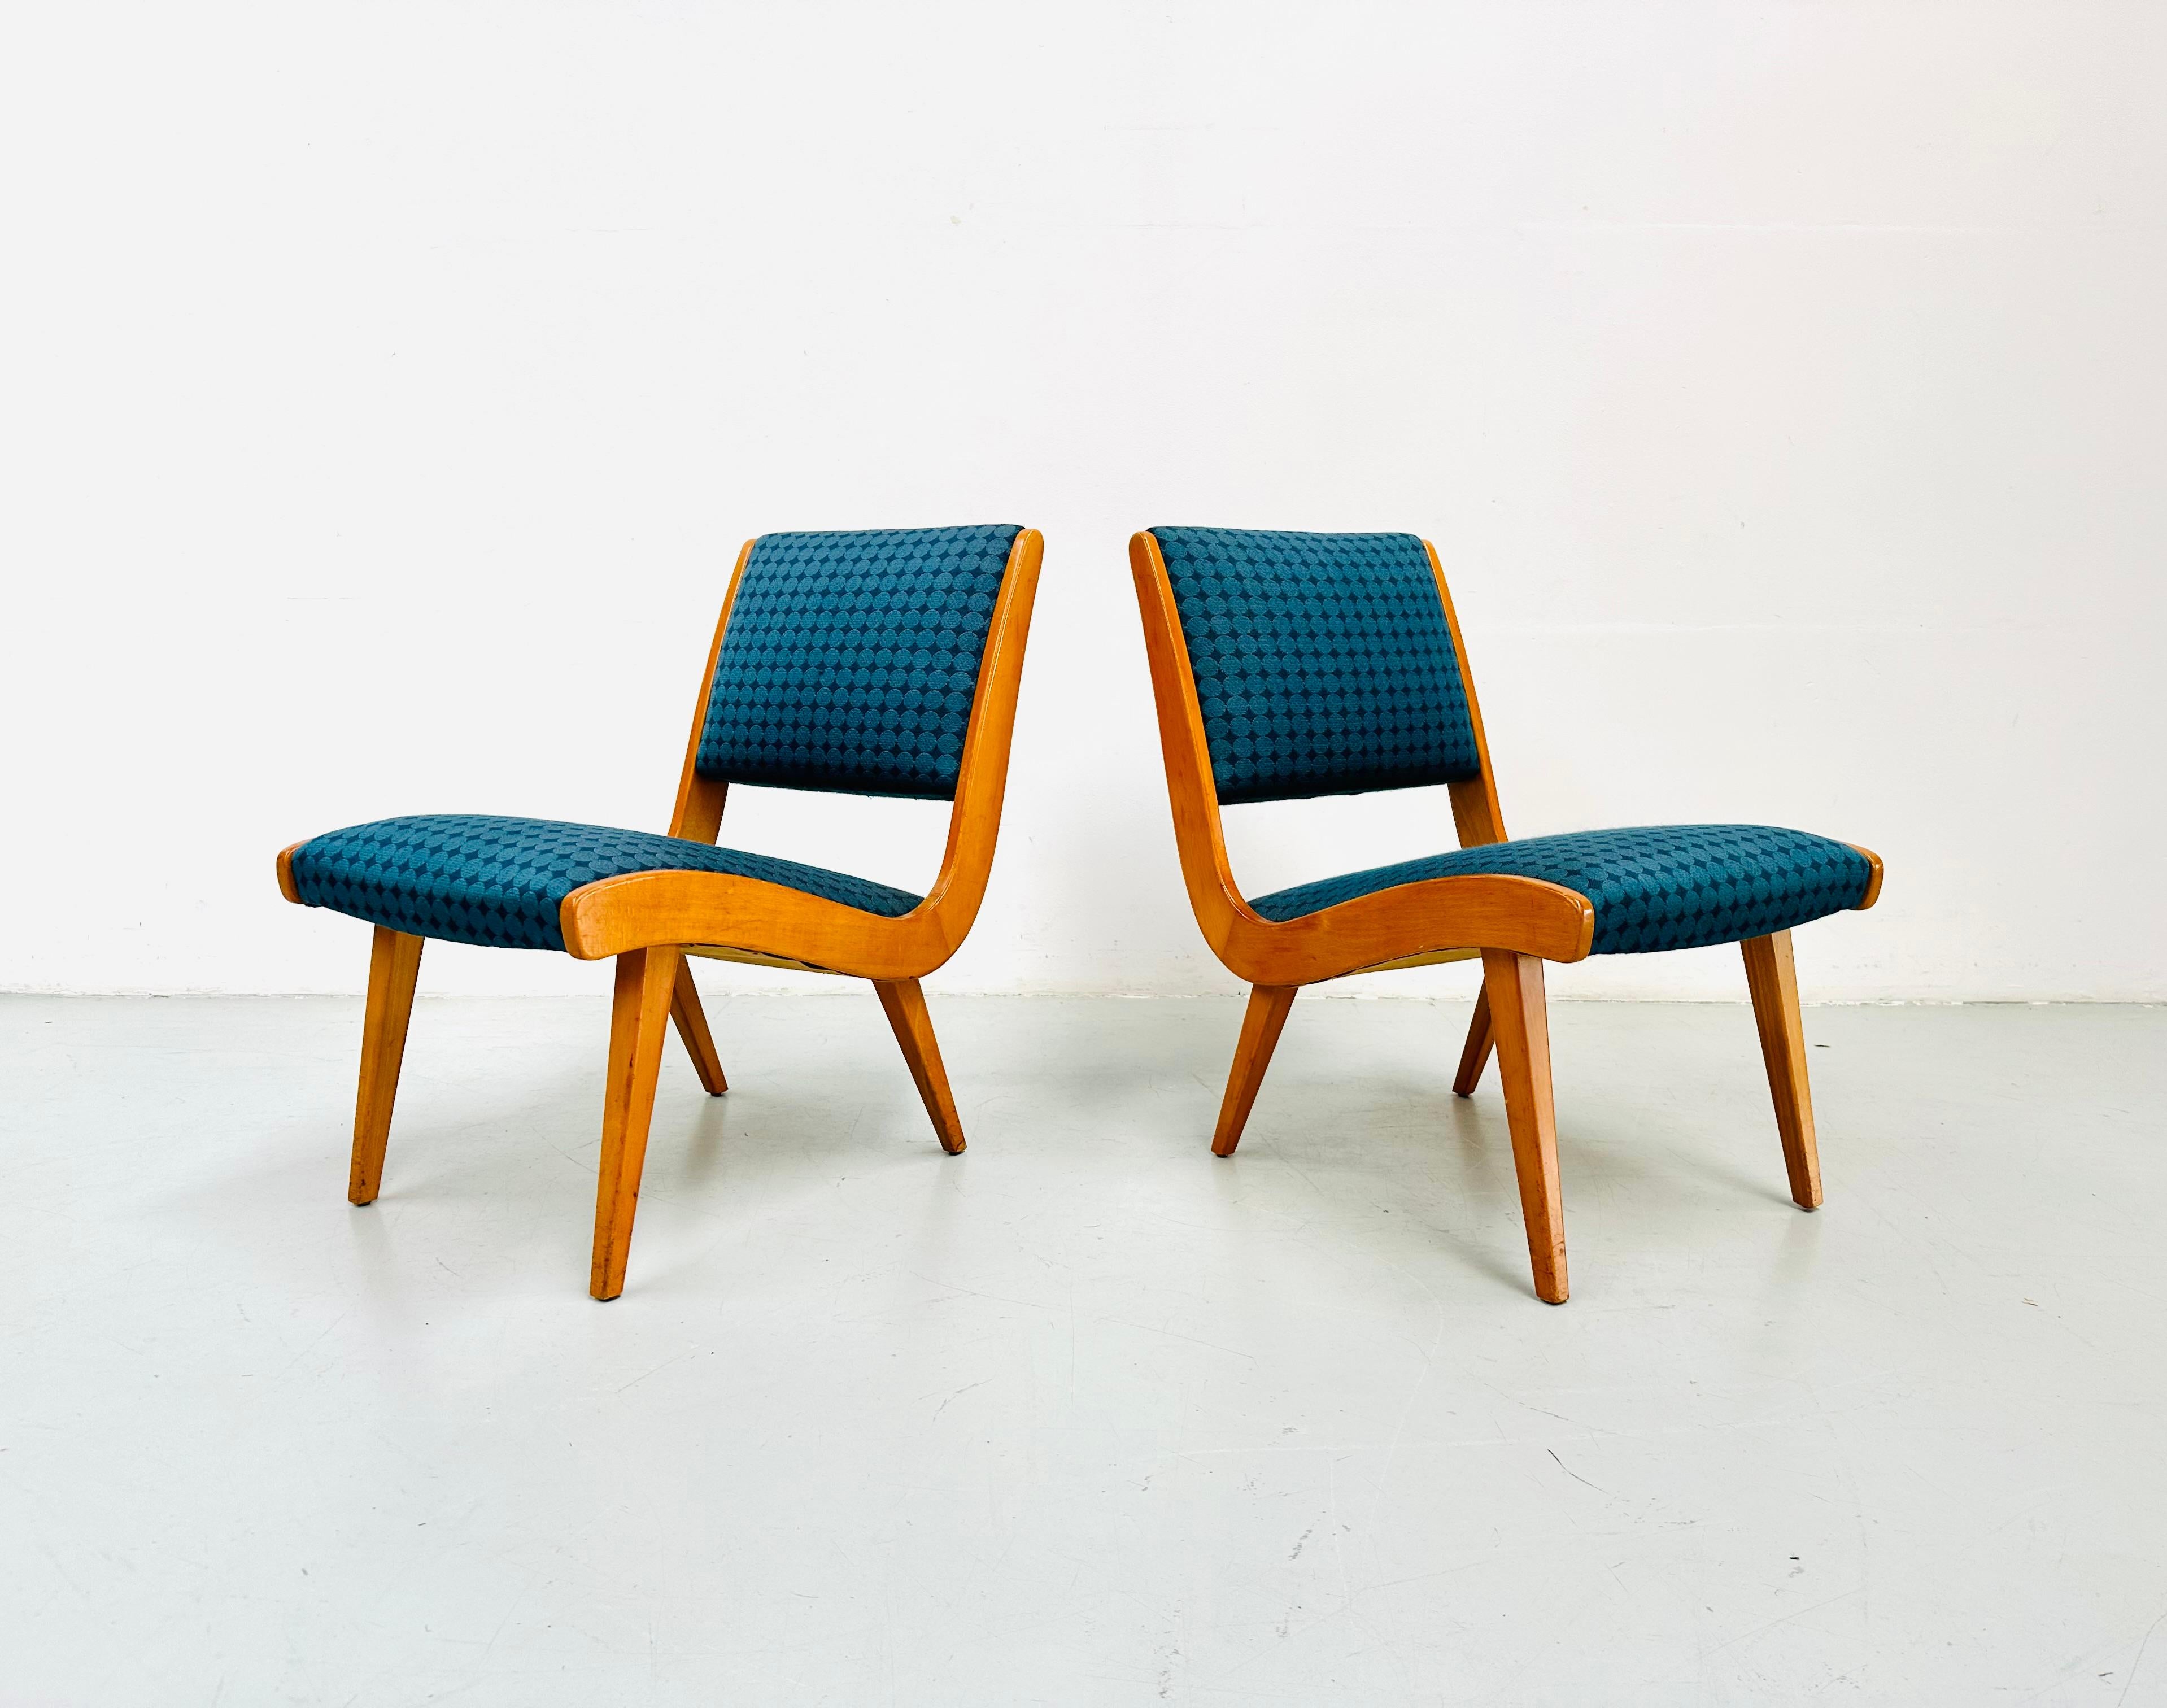 1950s Rare Set Vostra Chairs Numbered & Original Fabric by Jens Risom for Knoll. Bon état - En vente à Eindhoven, Noord Brabant